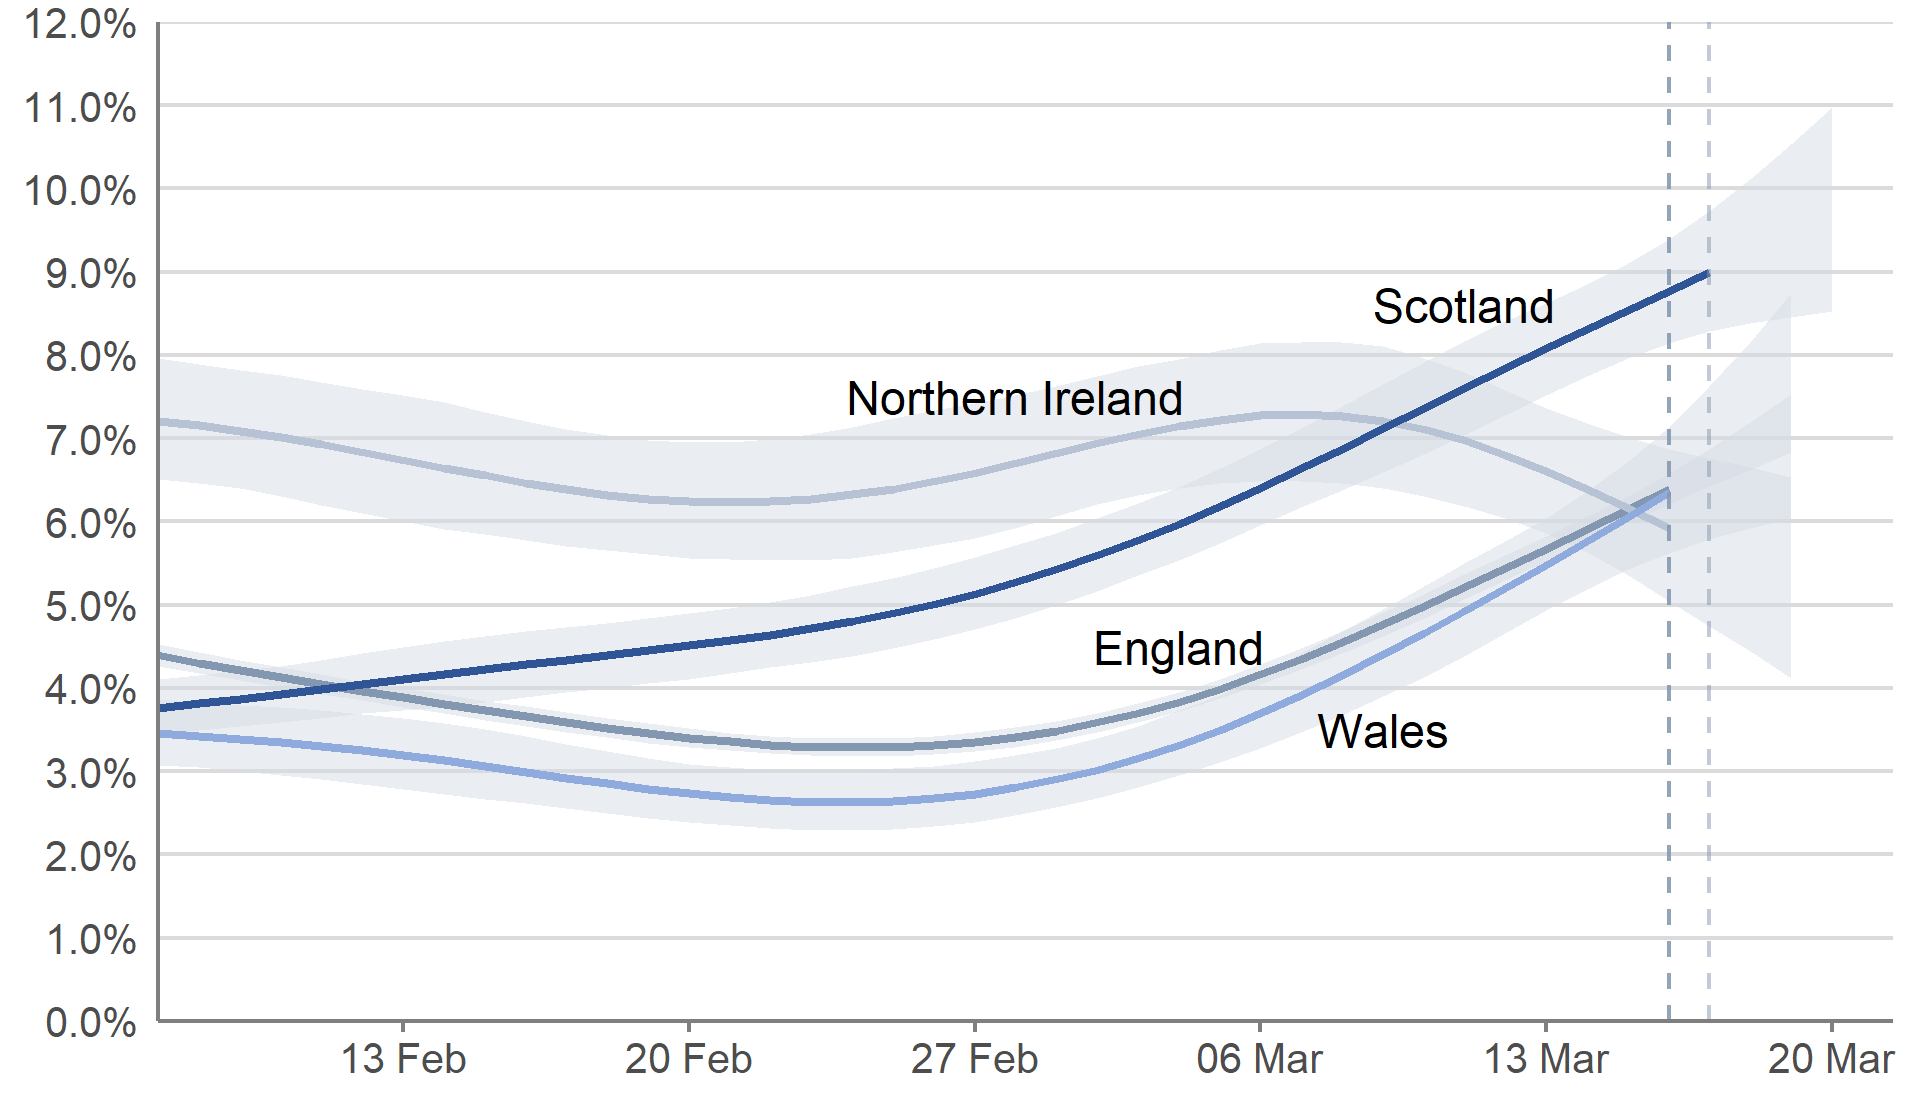 In England, Wales and Scotland, the estimated percentage of people testing positive continued to increase in the week to 20 March 2022. In Northern Ireland, the estimated percentage of people testing positive decreased in the most recent week.